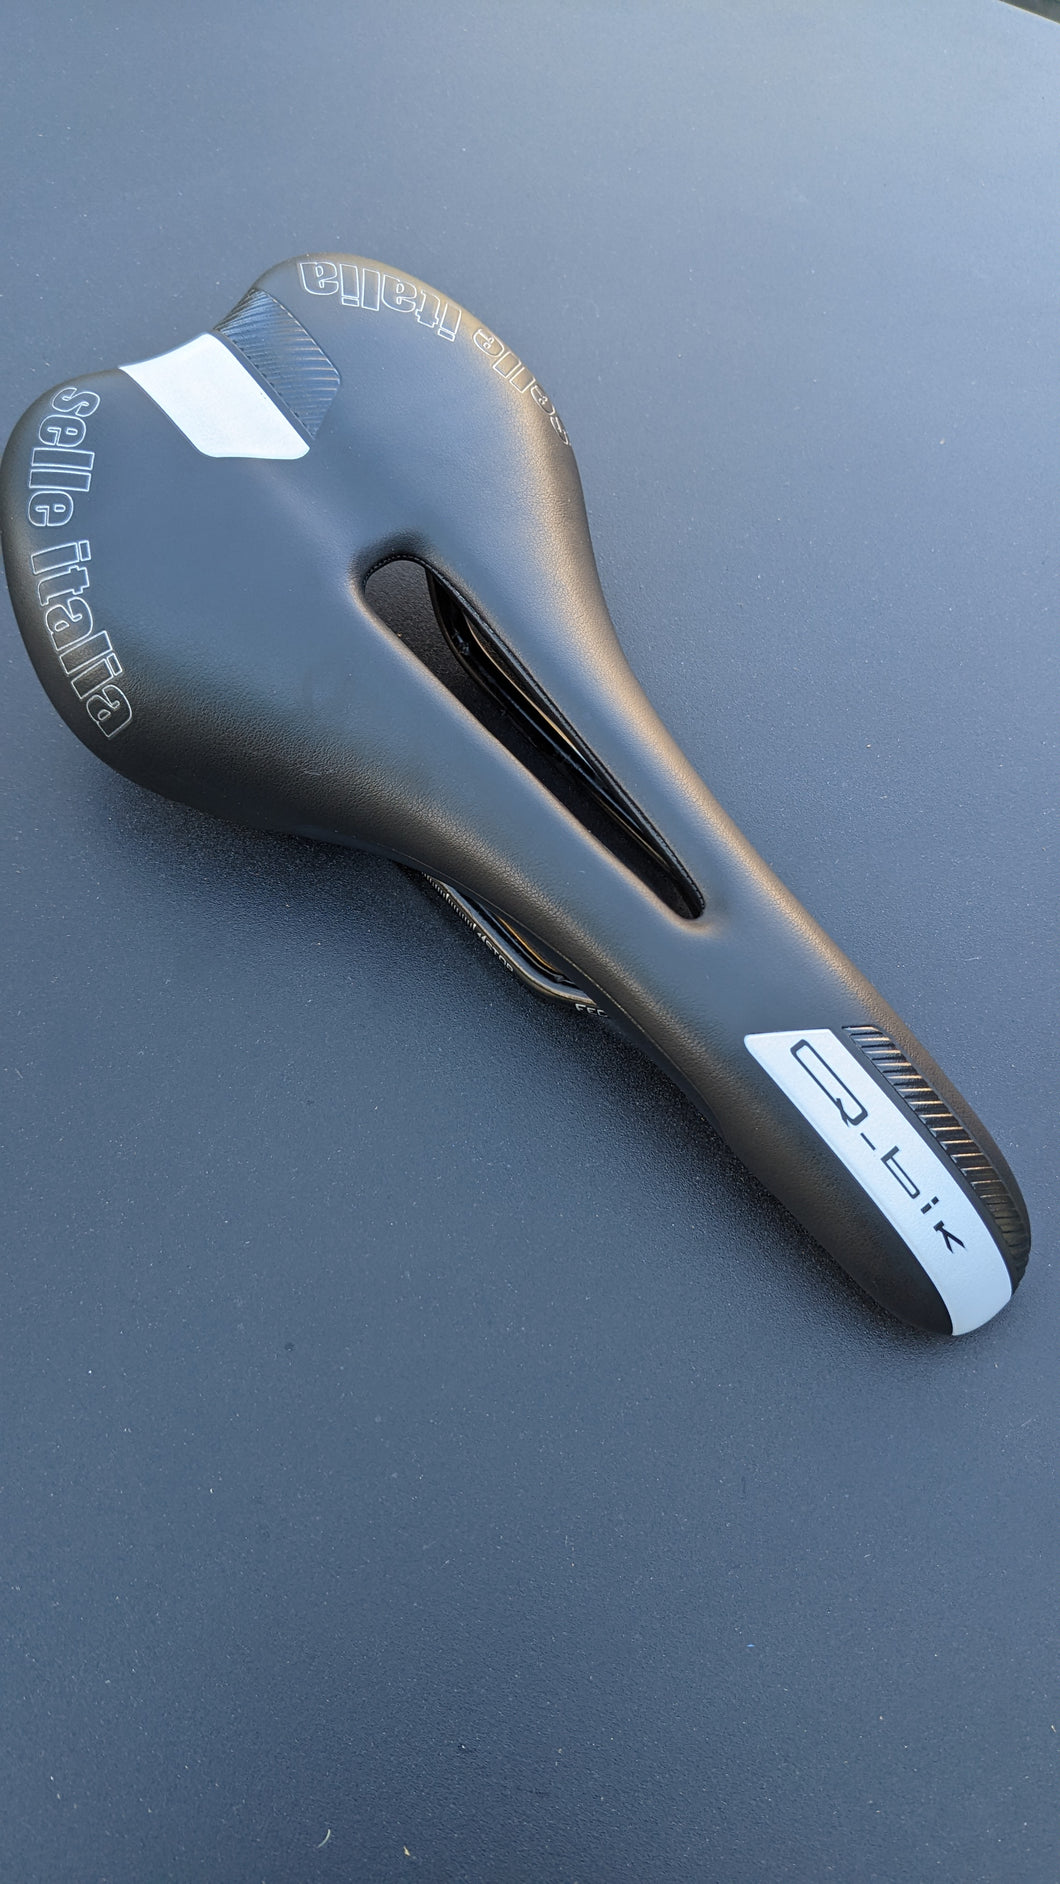 Selle Italia Saddle - FREE Shipping Cost Only